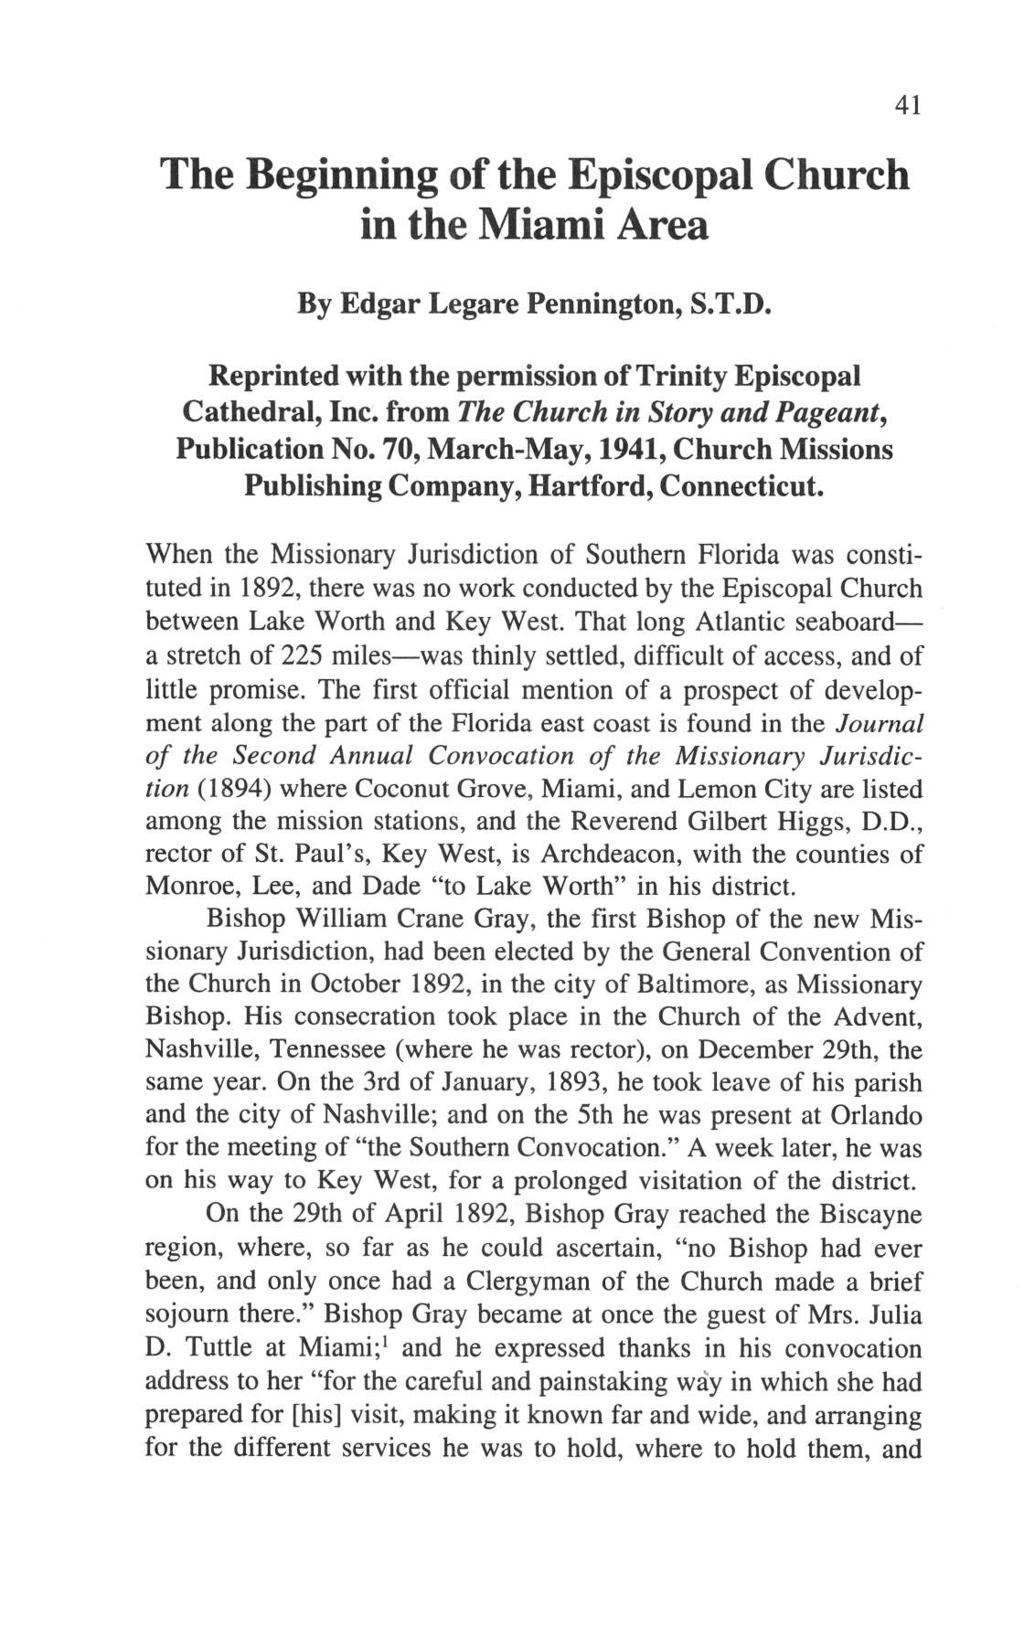 The Beginning of the Episcopal Church in the Miami Area By Edgar Legare Pennington, S.T.D. Reprinted with the permission of Trinity Episcopal Cathedral, Inc.